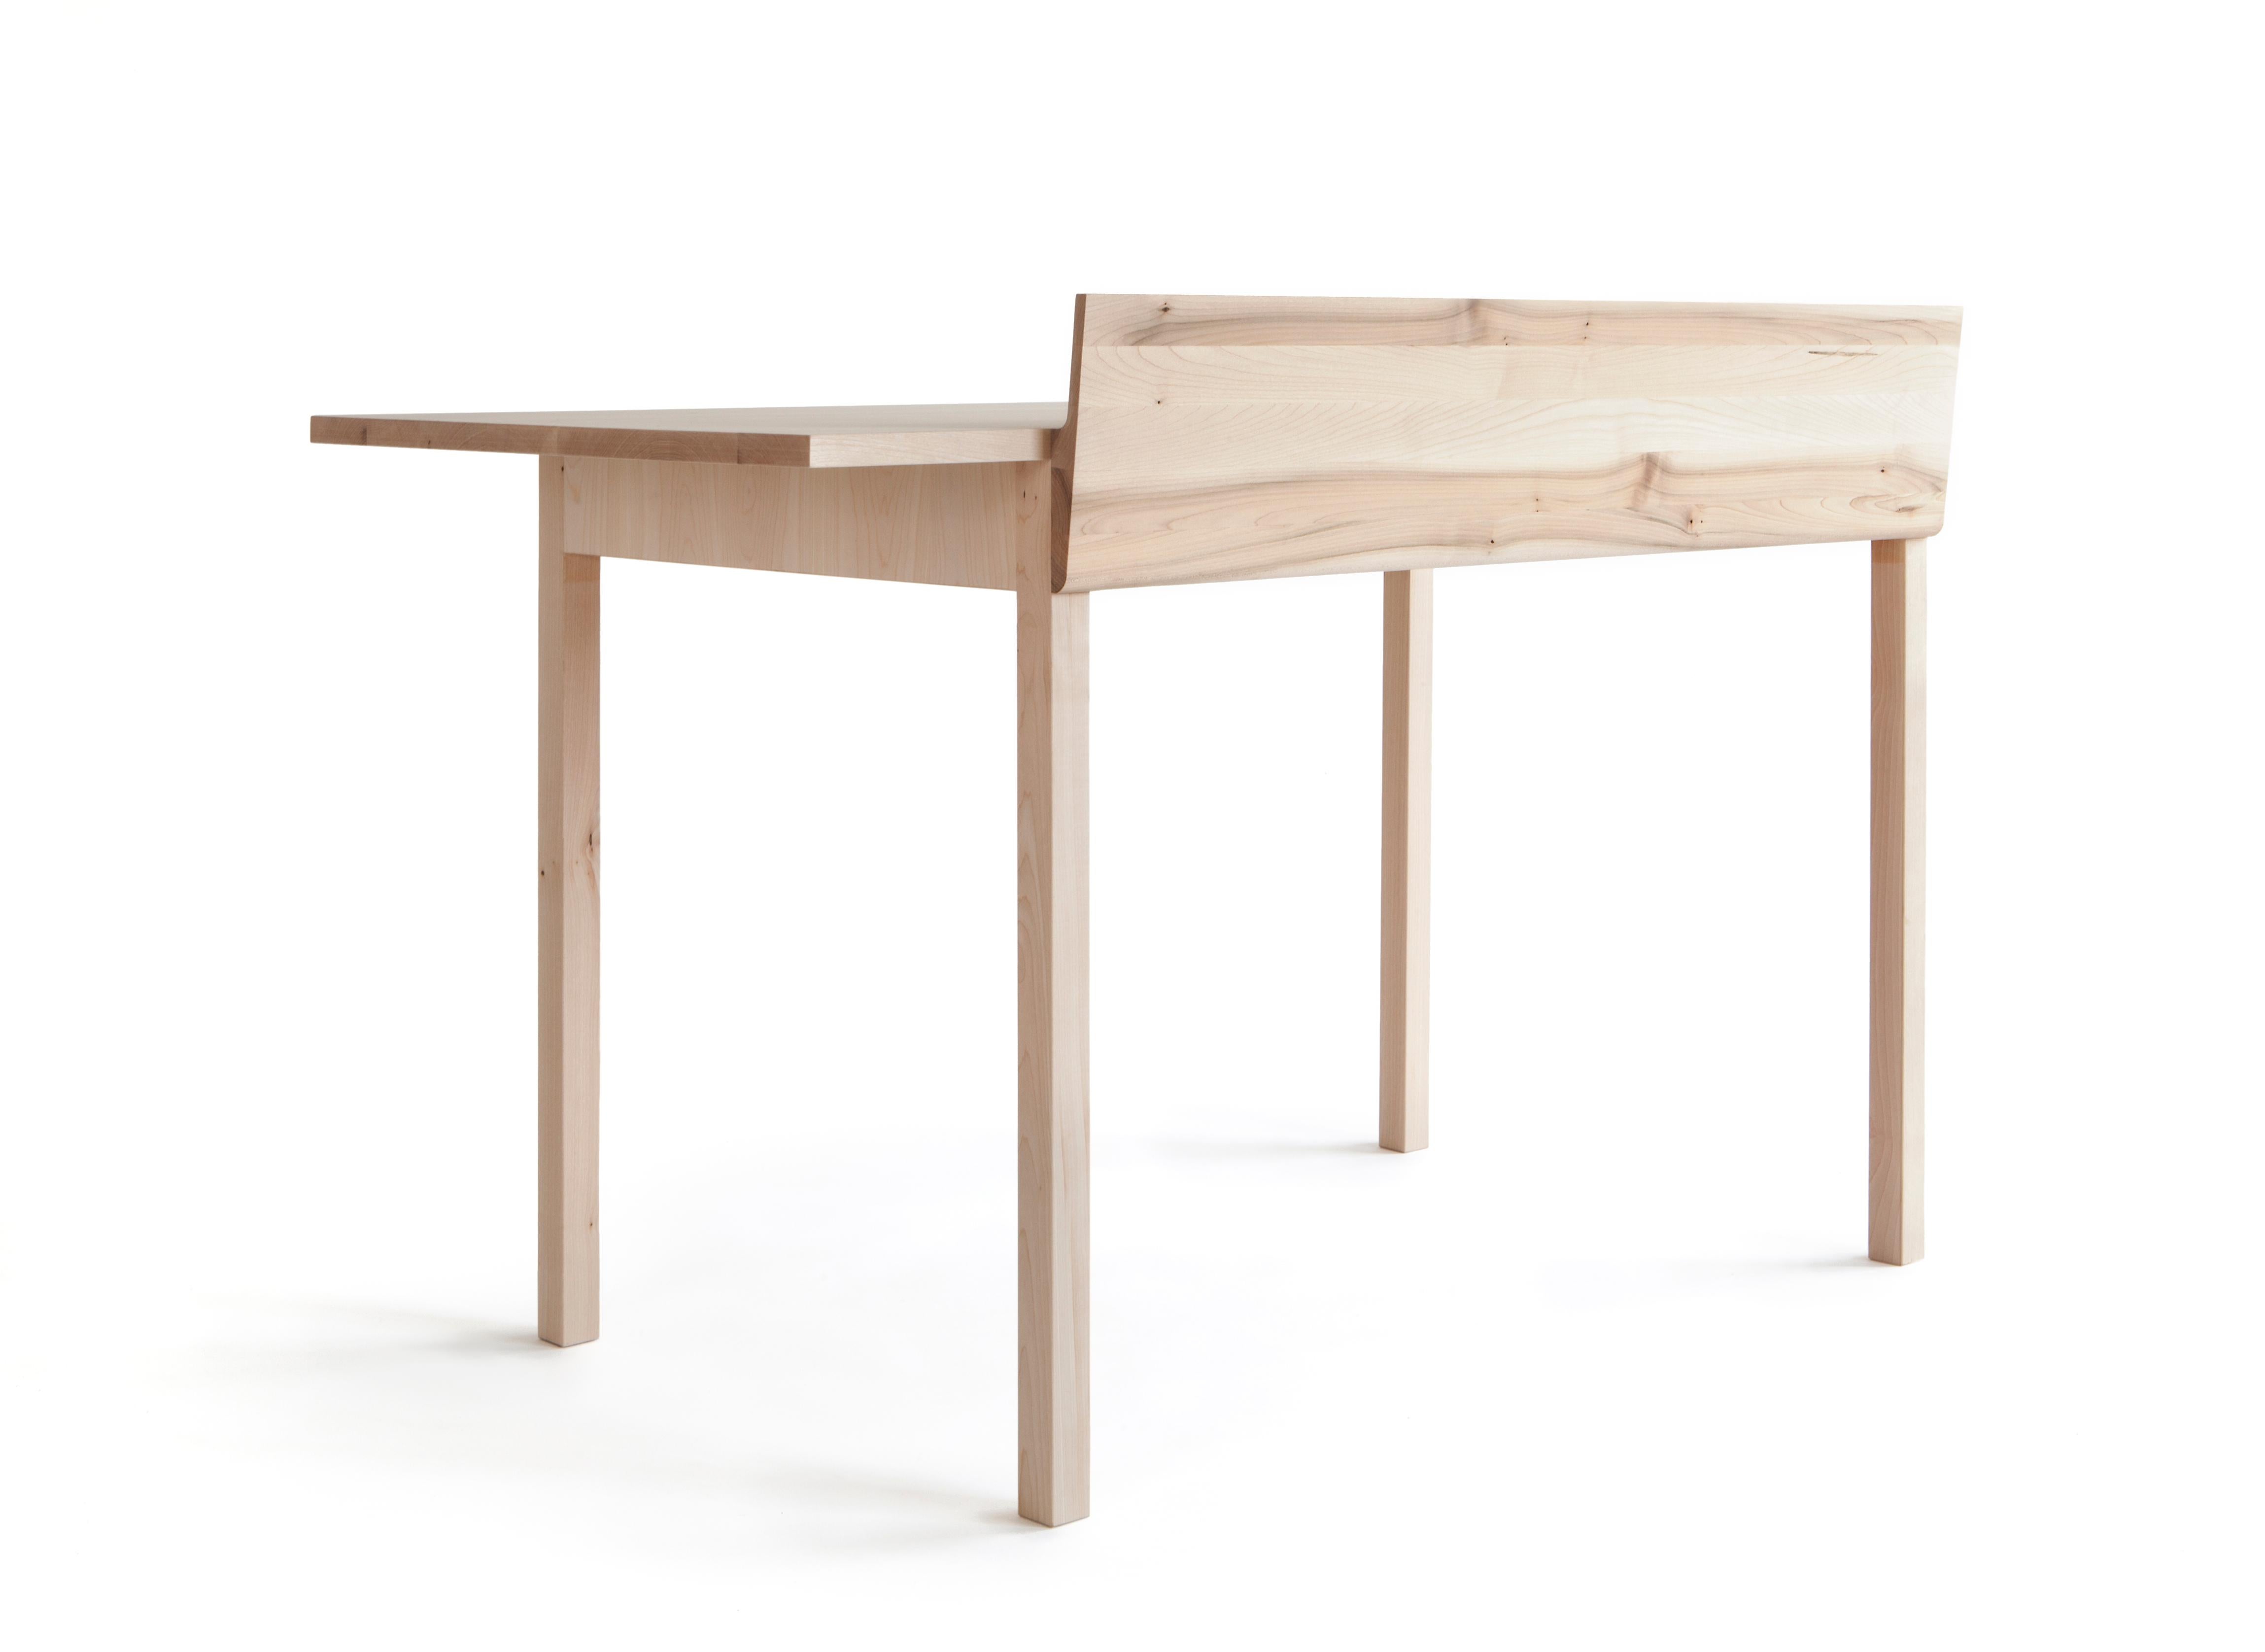 The light drawing table fits into hotel rooms, shops, homes and offices among others. Its drawer, as well as the whole table, is made following the old table making traditions of the Nordic craftsmanship heritage, making it a solution that lasts